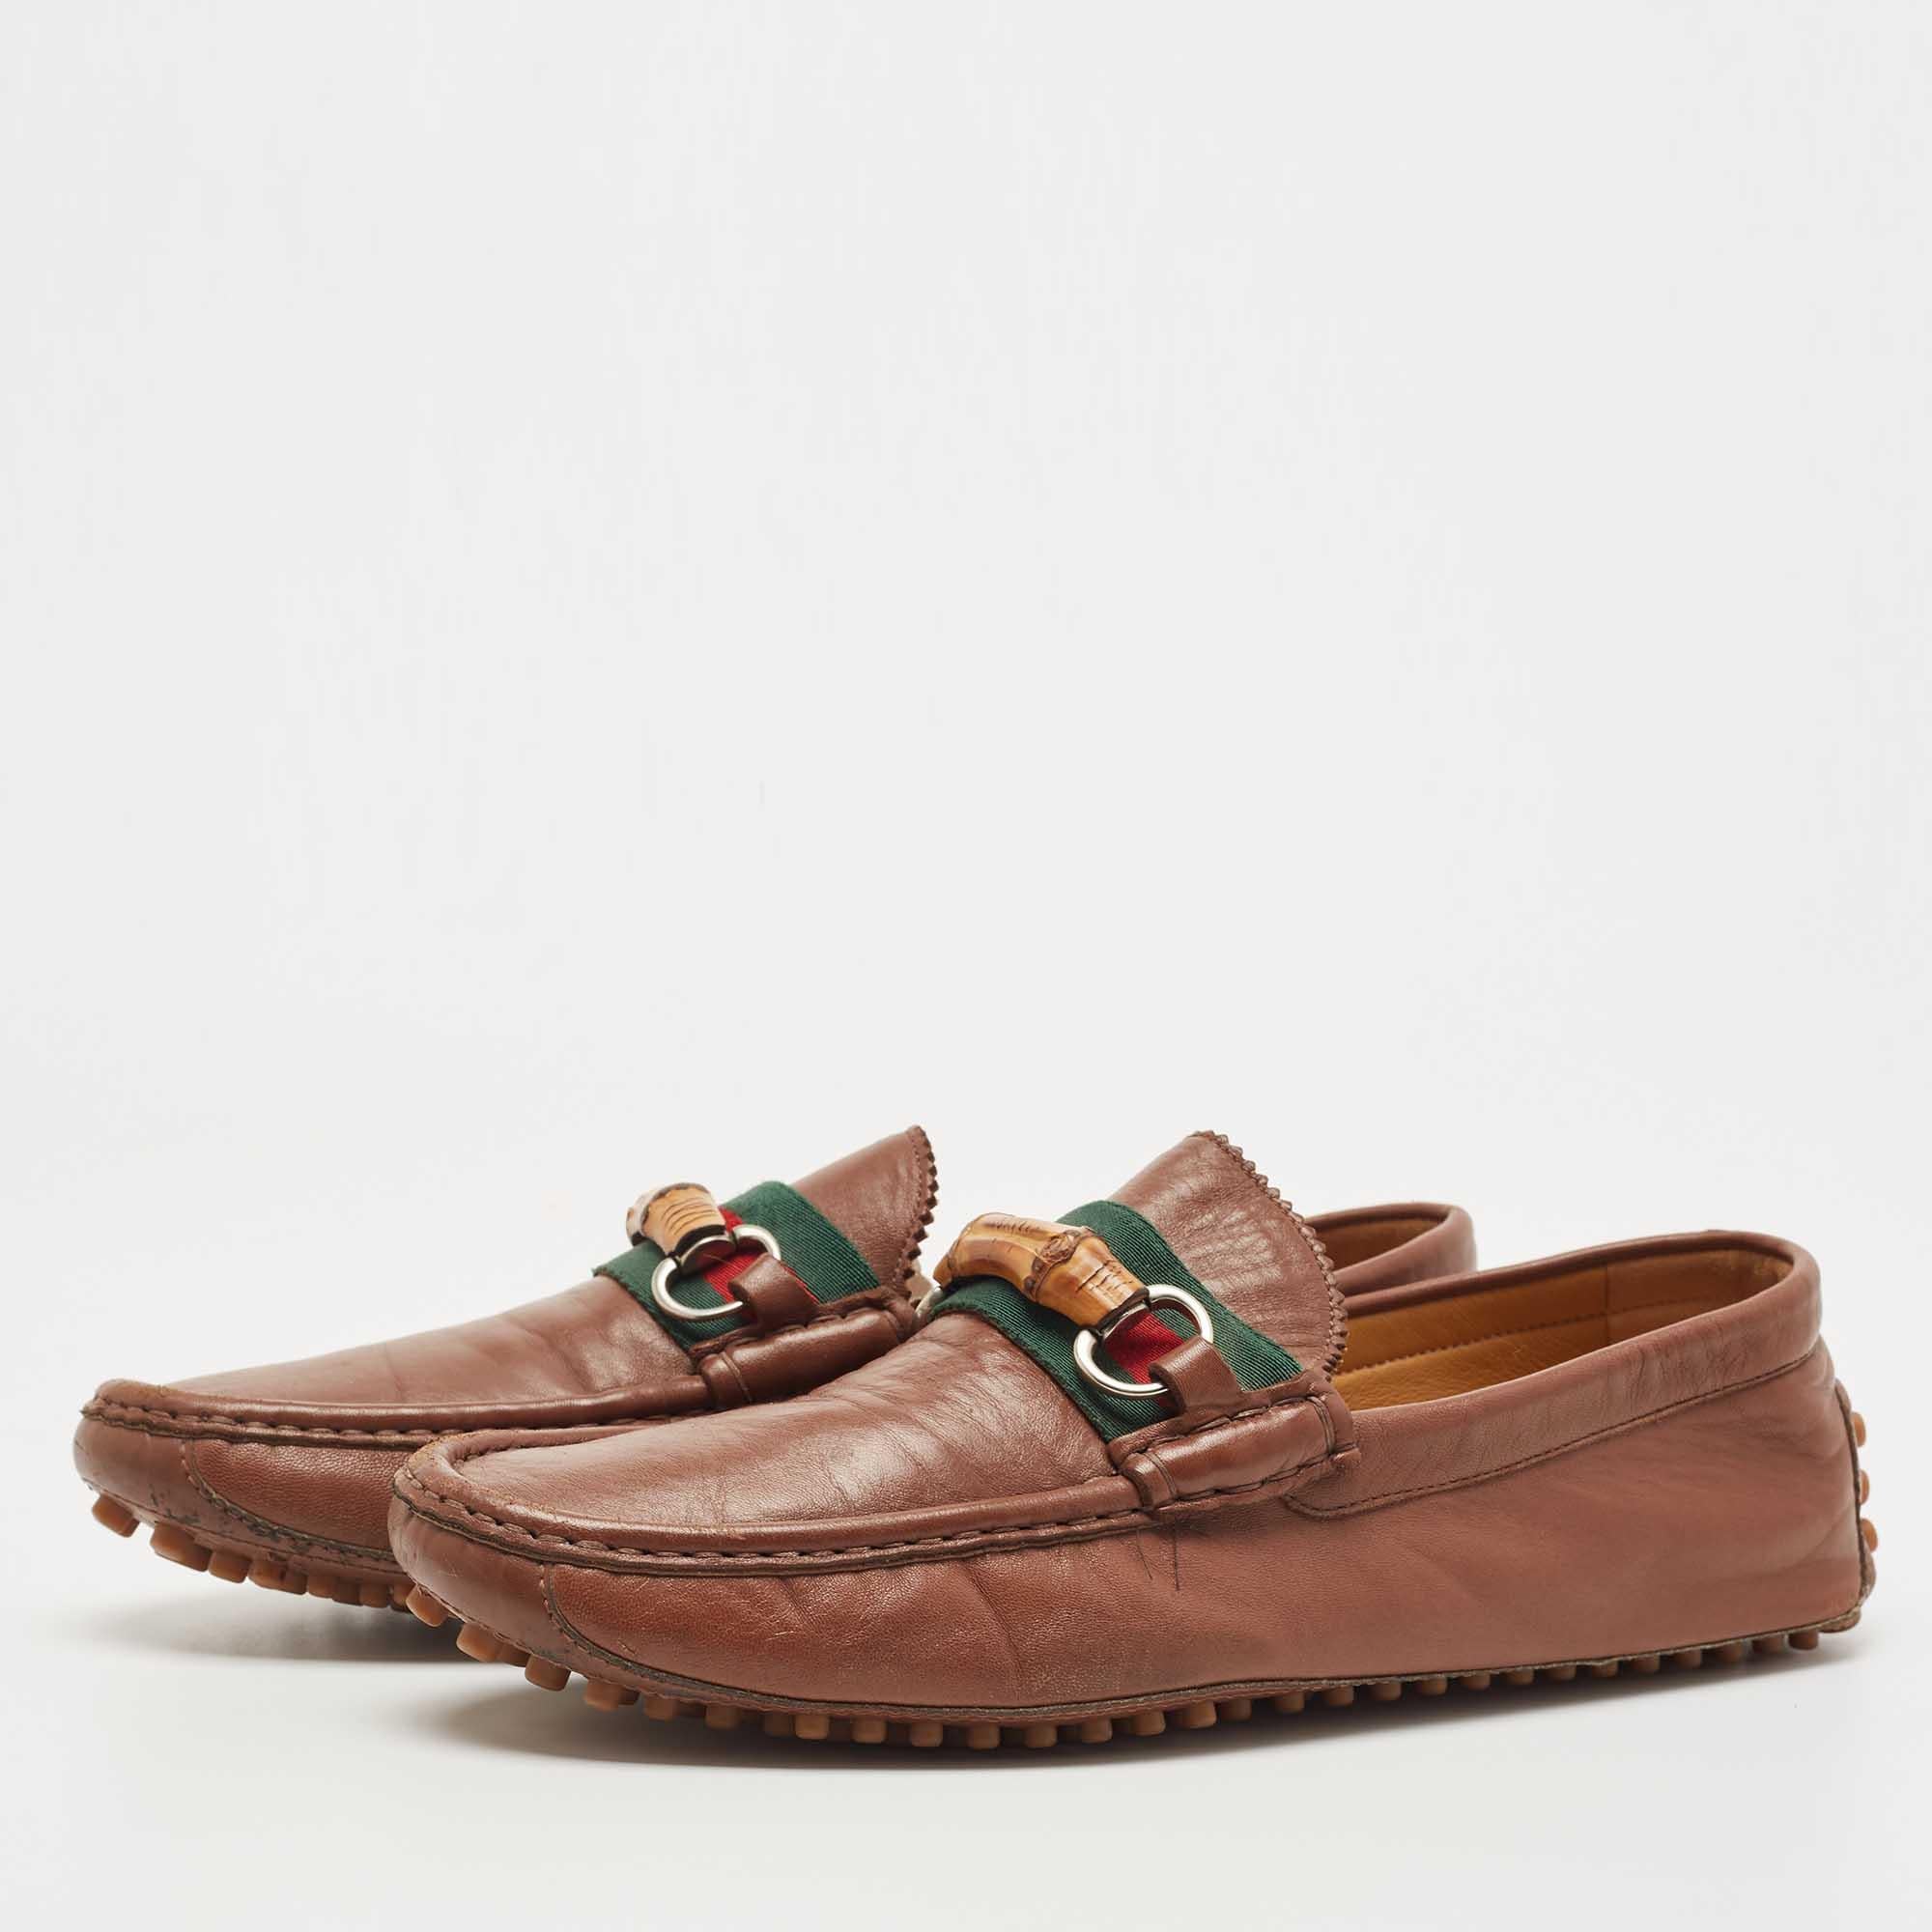 Project an ultra-stylish look in these grey loafers from Gucci! They have been crafted from leather and designed with round toes and the signature bamboo Horsebit accents on the vamps. They are complete with comfortable leather-lined insoles and